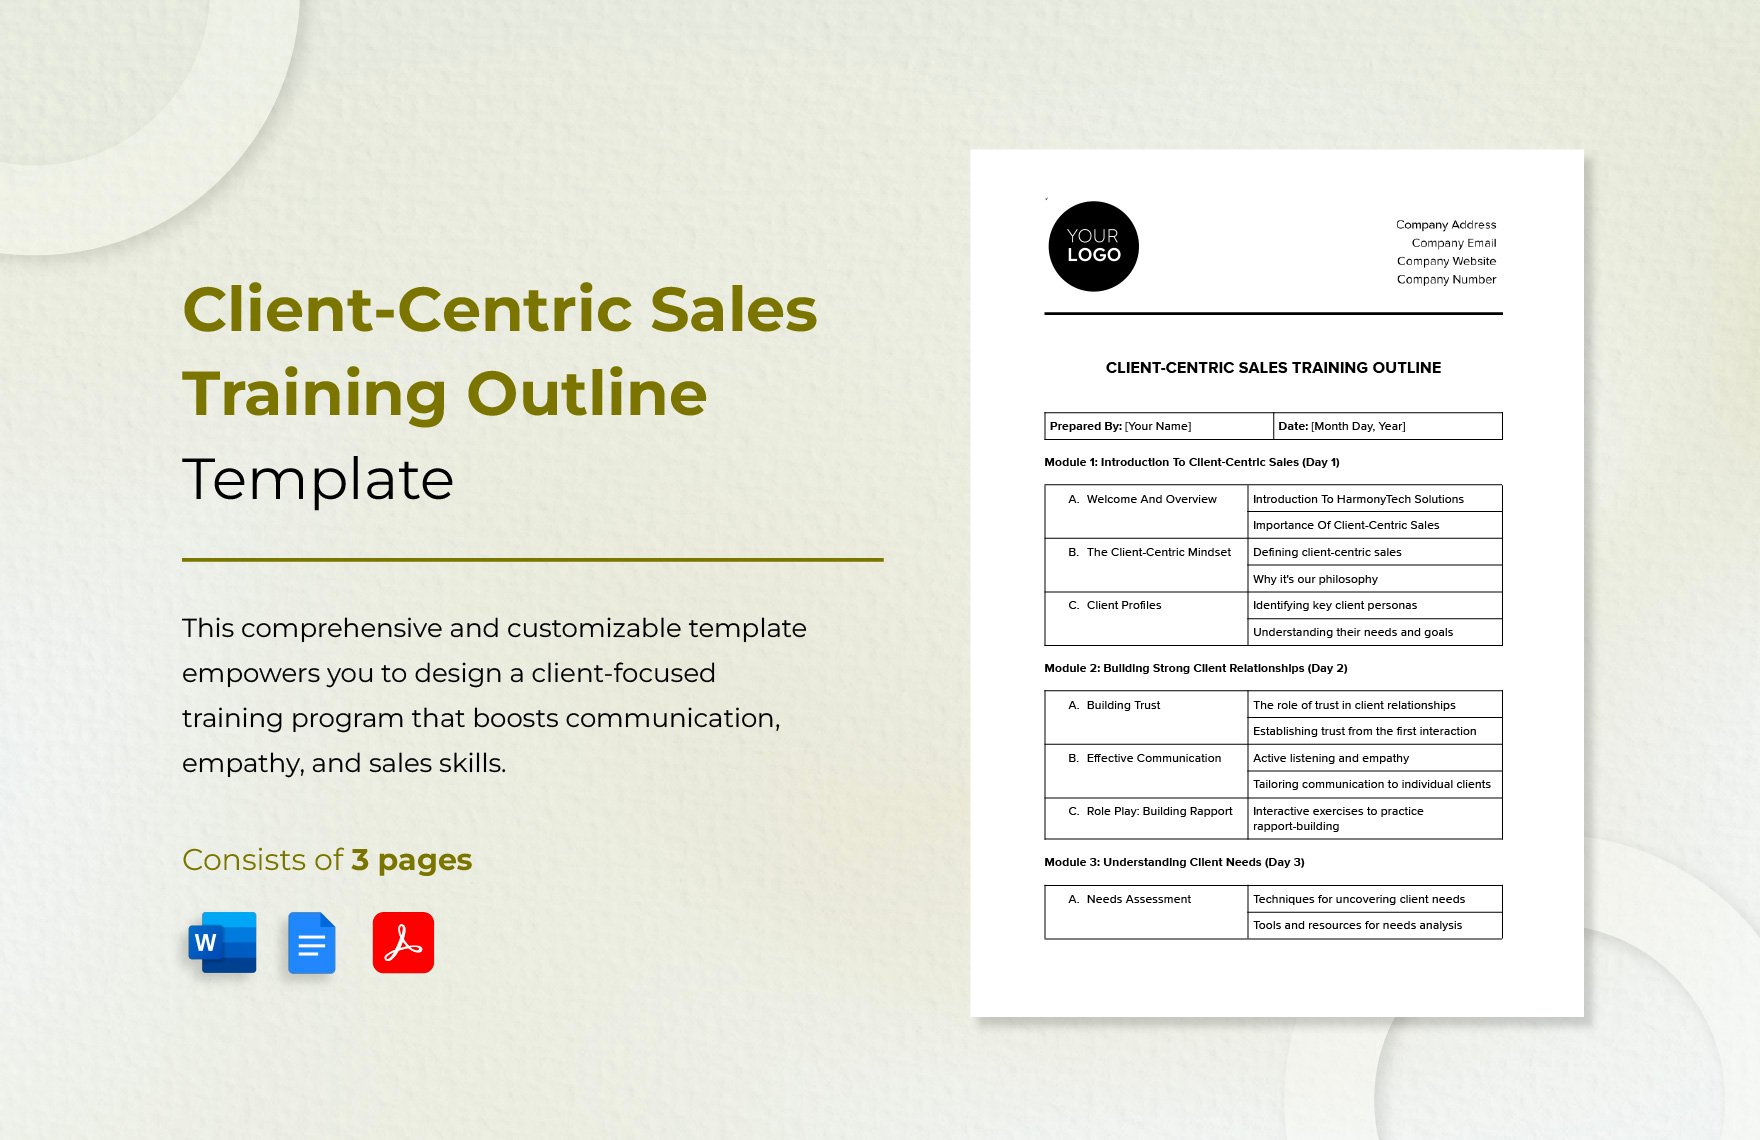 Client-centric Sales Training Outline Template in Word, Google Docs, PDF